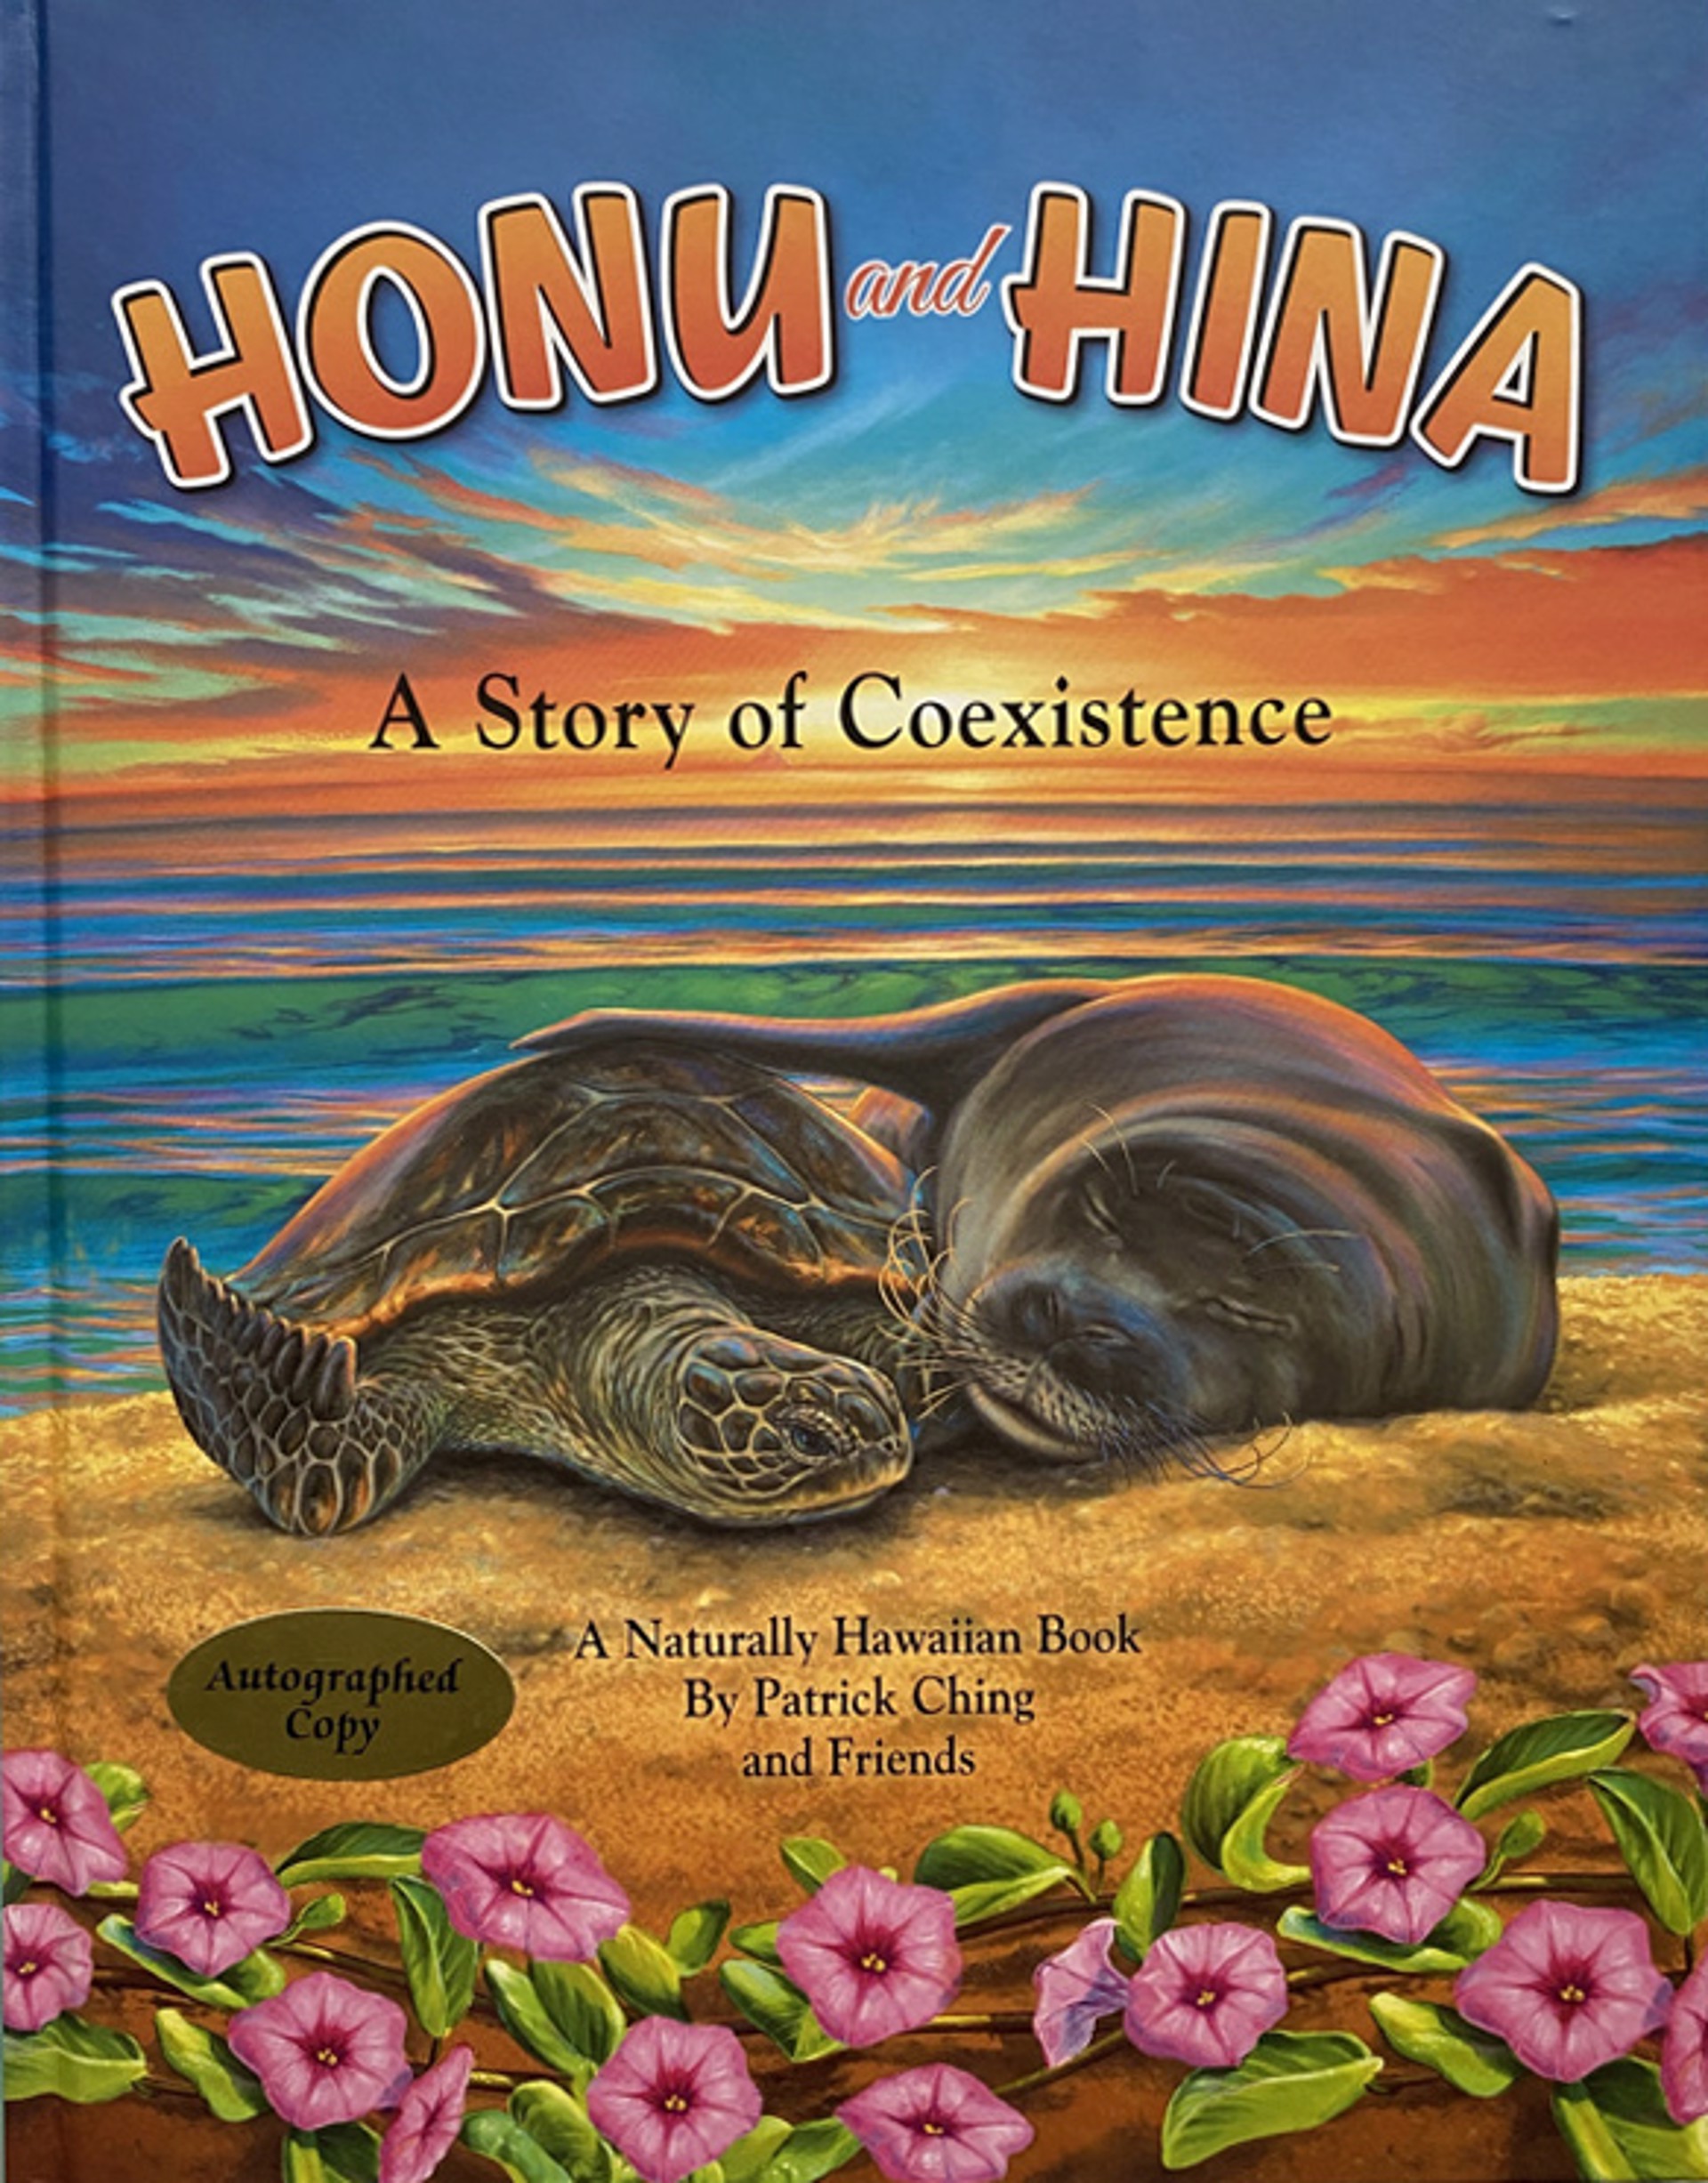 Honu and Hina - A Story of Coexistance by Patrick Ching